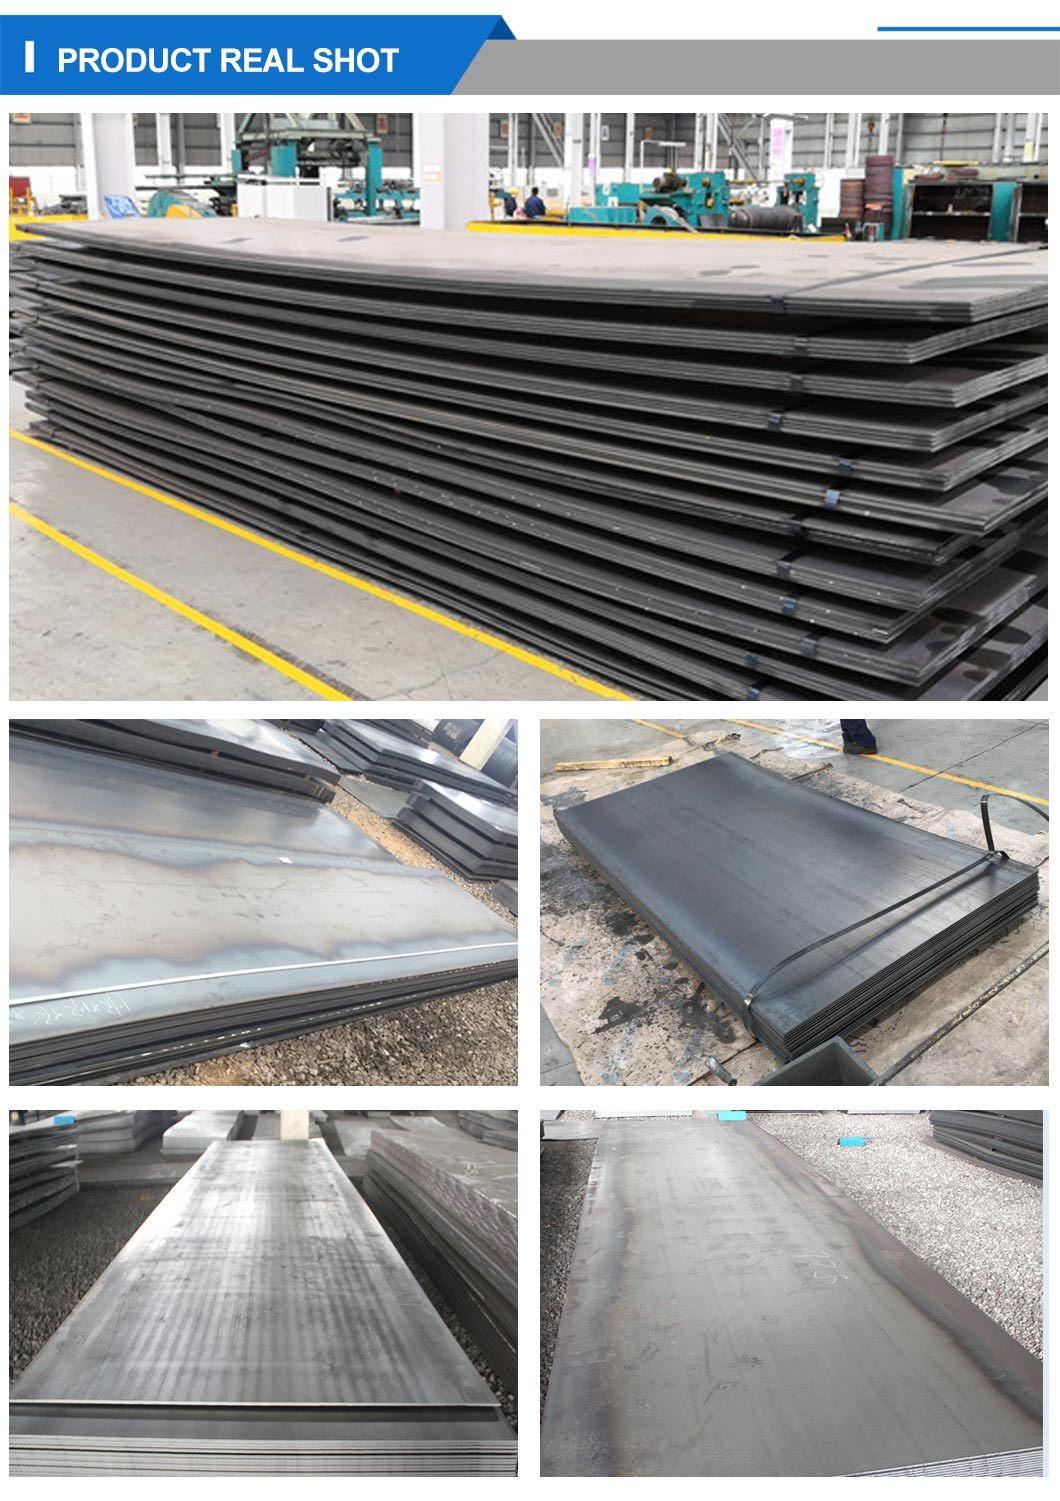 China Supplier S275jr/Dx51d/Painted/Q345/Ms/Galvanized/Construction Mild/Hot Rolled Carbon Steel Plate